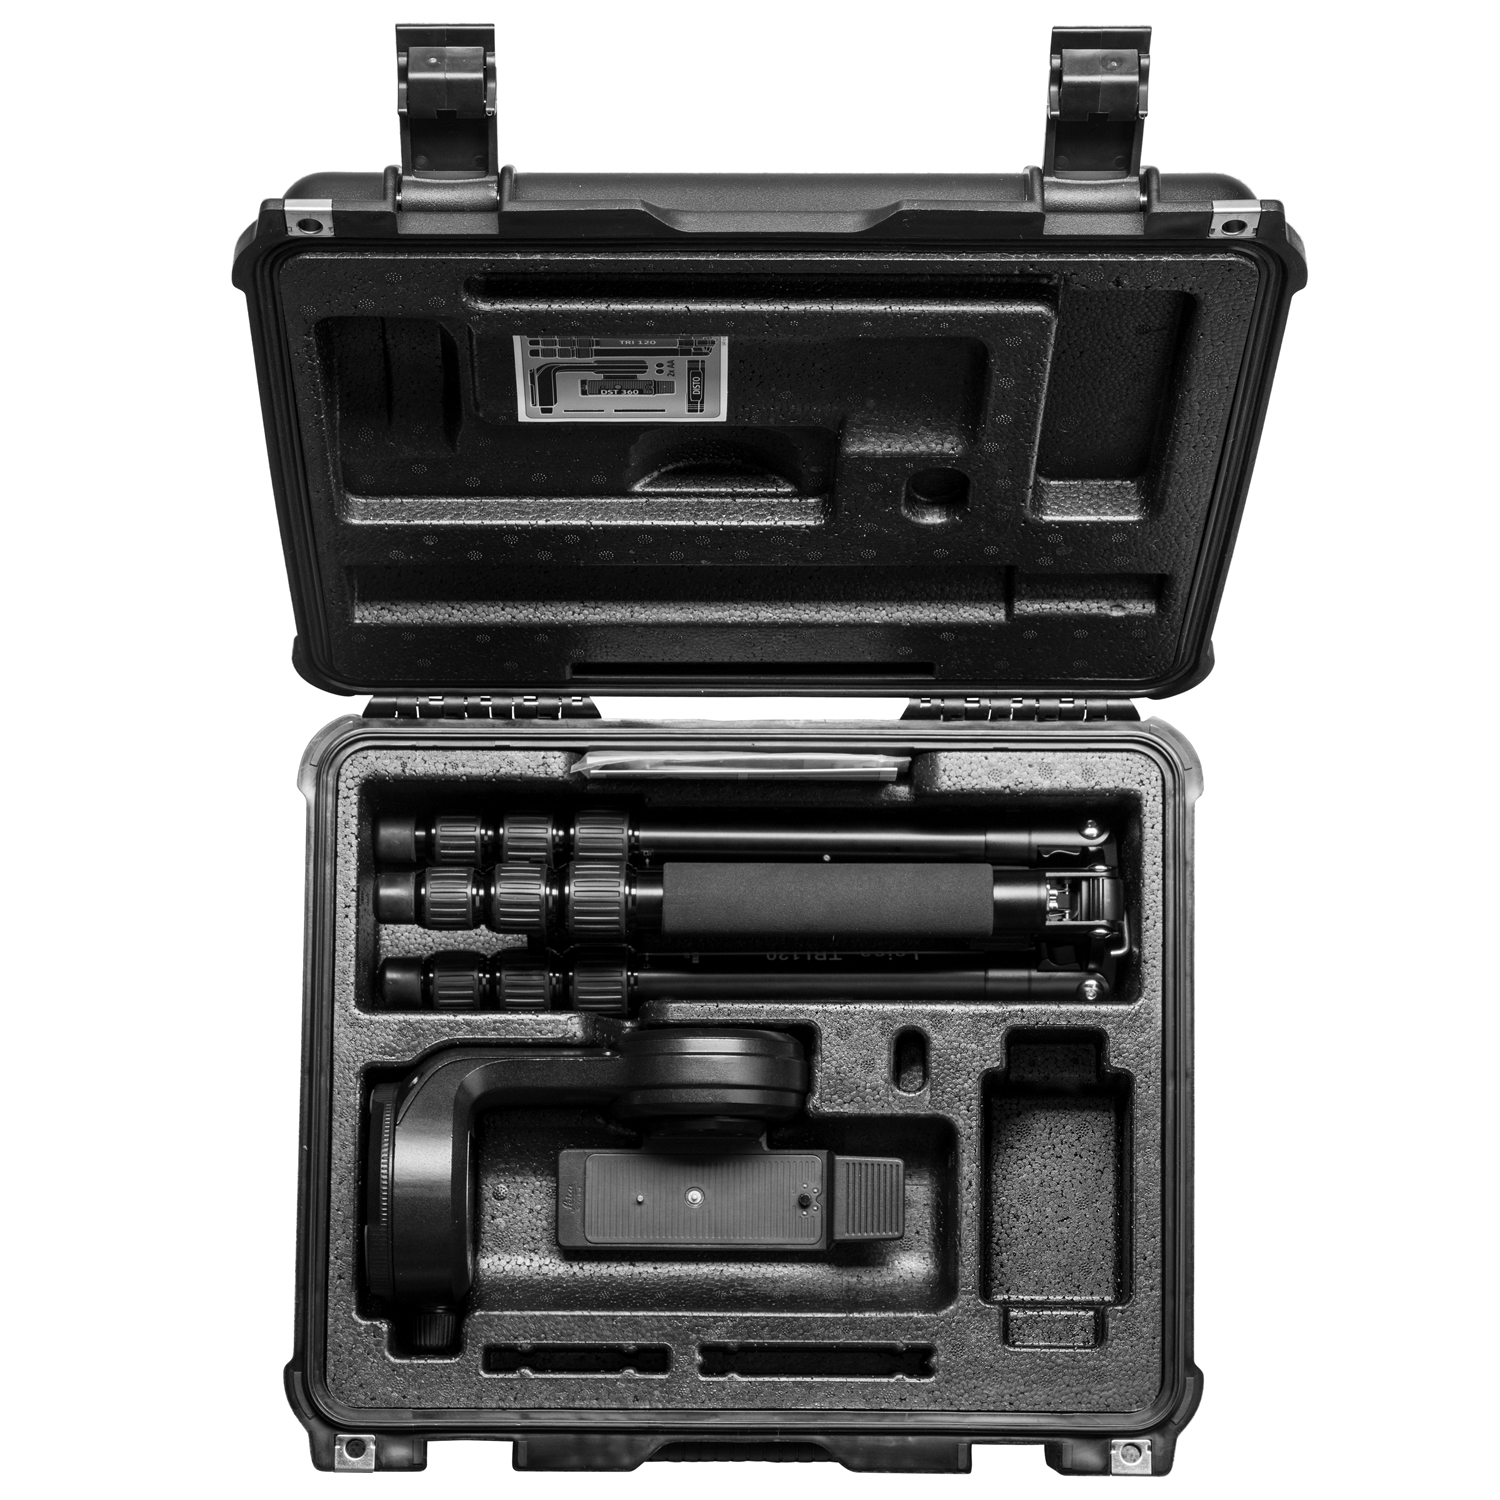 Leica DST360 - rugged hard case open